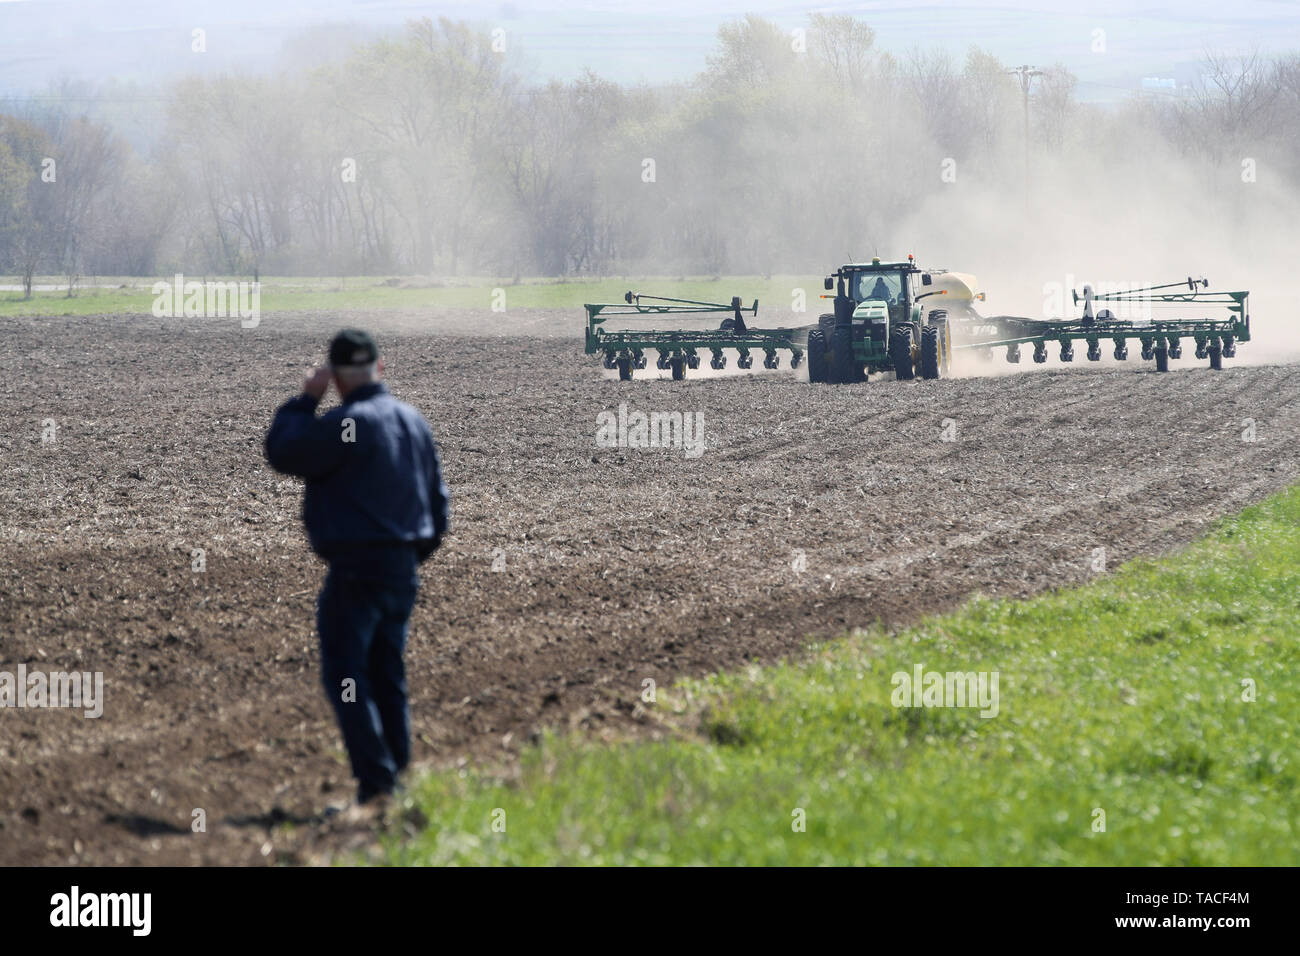 (190524) -- BEIJING, May 24, 2019 (Xinhua) -- Bill Pellett watches as his son Bret plants corn with a planter machine at their family farm in Atlantic of Cass county, Iowa, the United States, April 24, 2019. Bill Pellett knows how to farm, but just like most of his peers across the country, the 71-year-old farmer is feeling less assured of what he could get from a new year of farming, as there appears to be no quick resolution of the year-long trade disputes between the United States and China. TO GO WITH 'Spotlight: Leading U.S. farming state enters new crop season amid uncertainty over tra Stock Photo